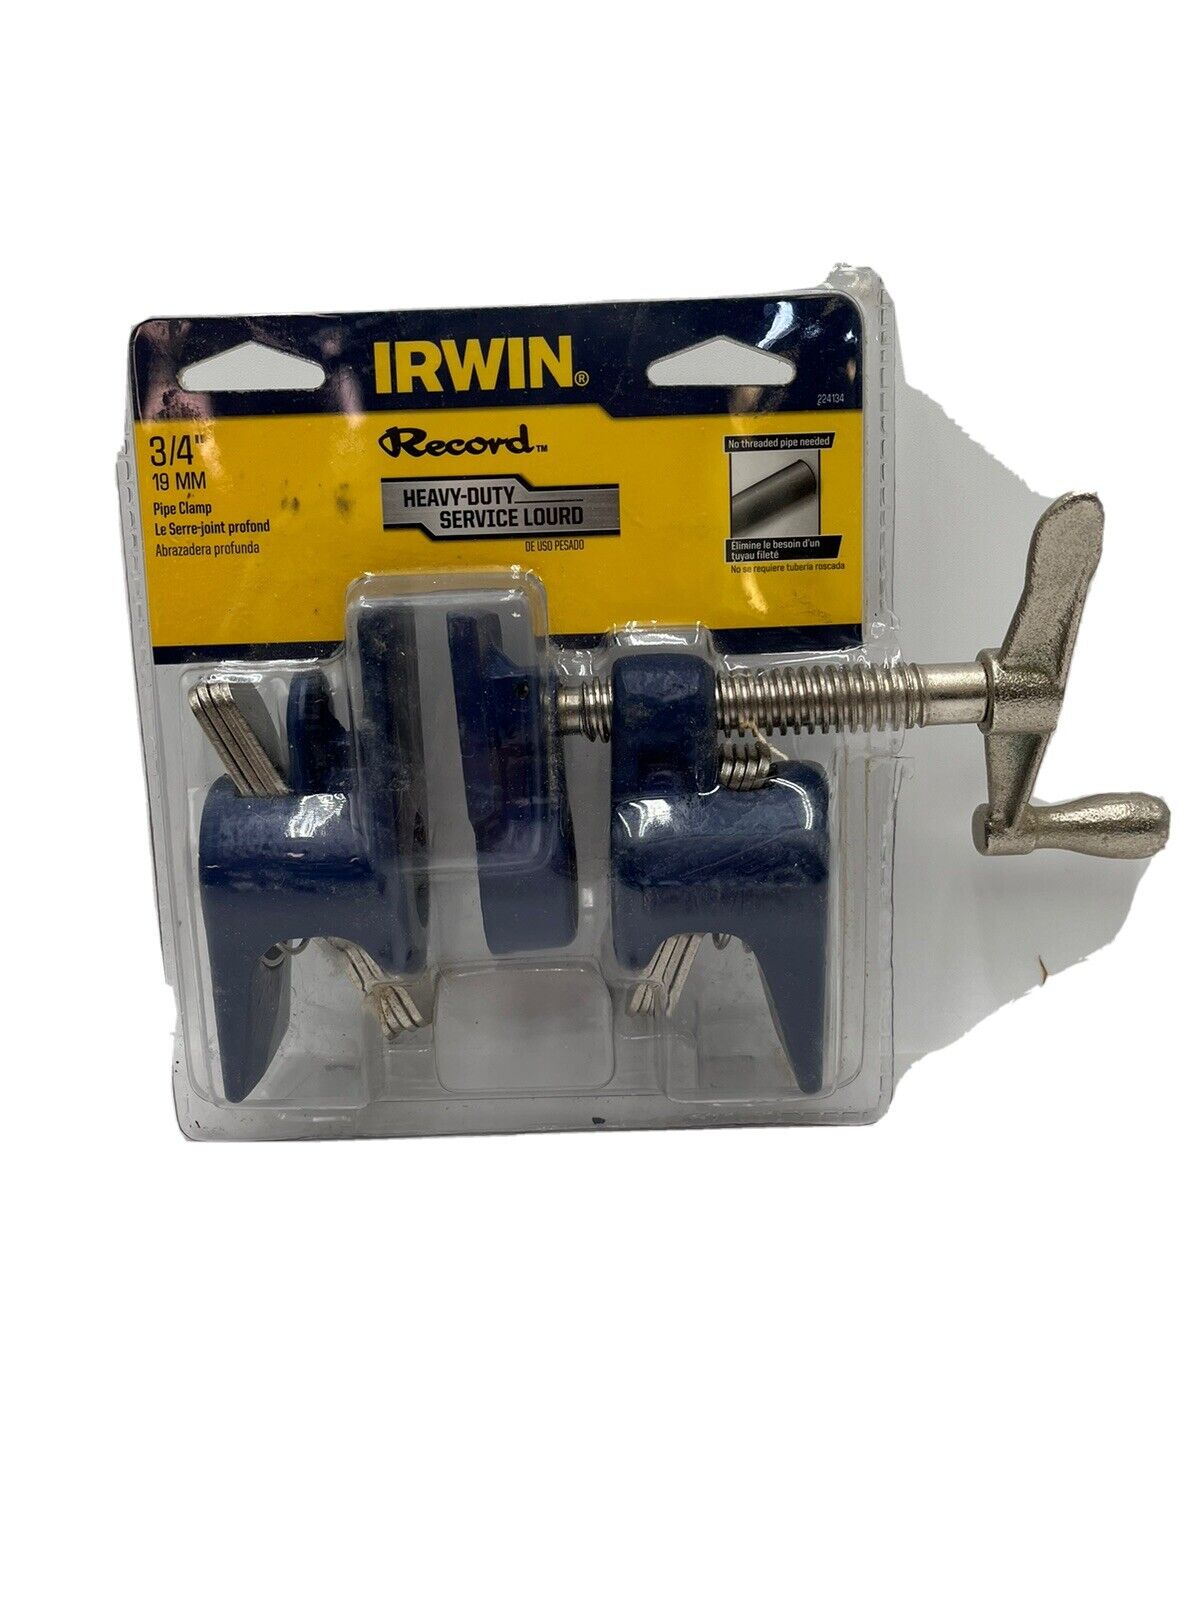 NOS Irwin Record 3/4 Pipe Clamp Fixtures 